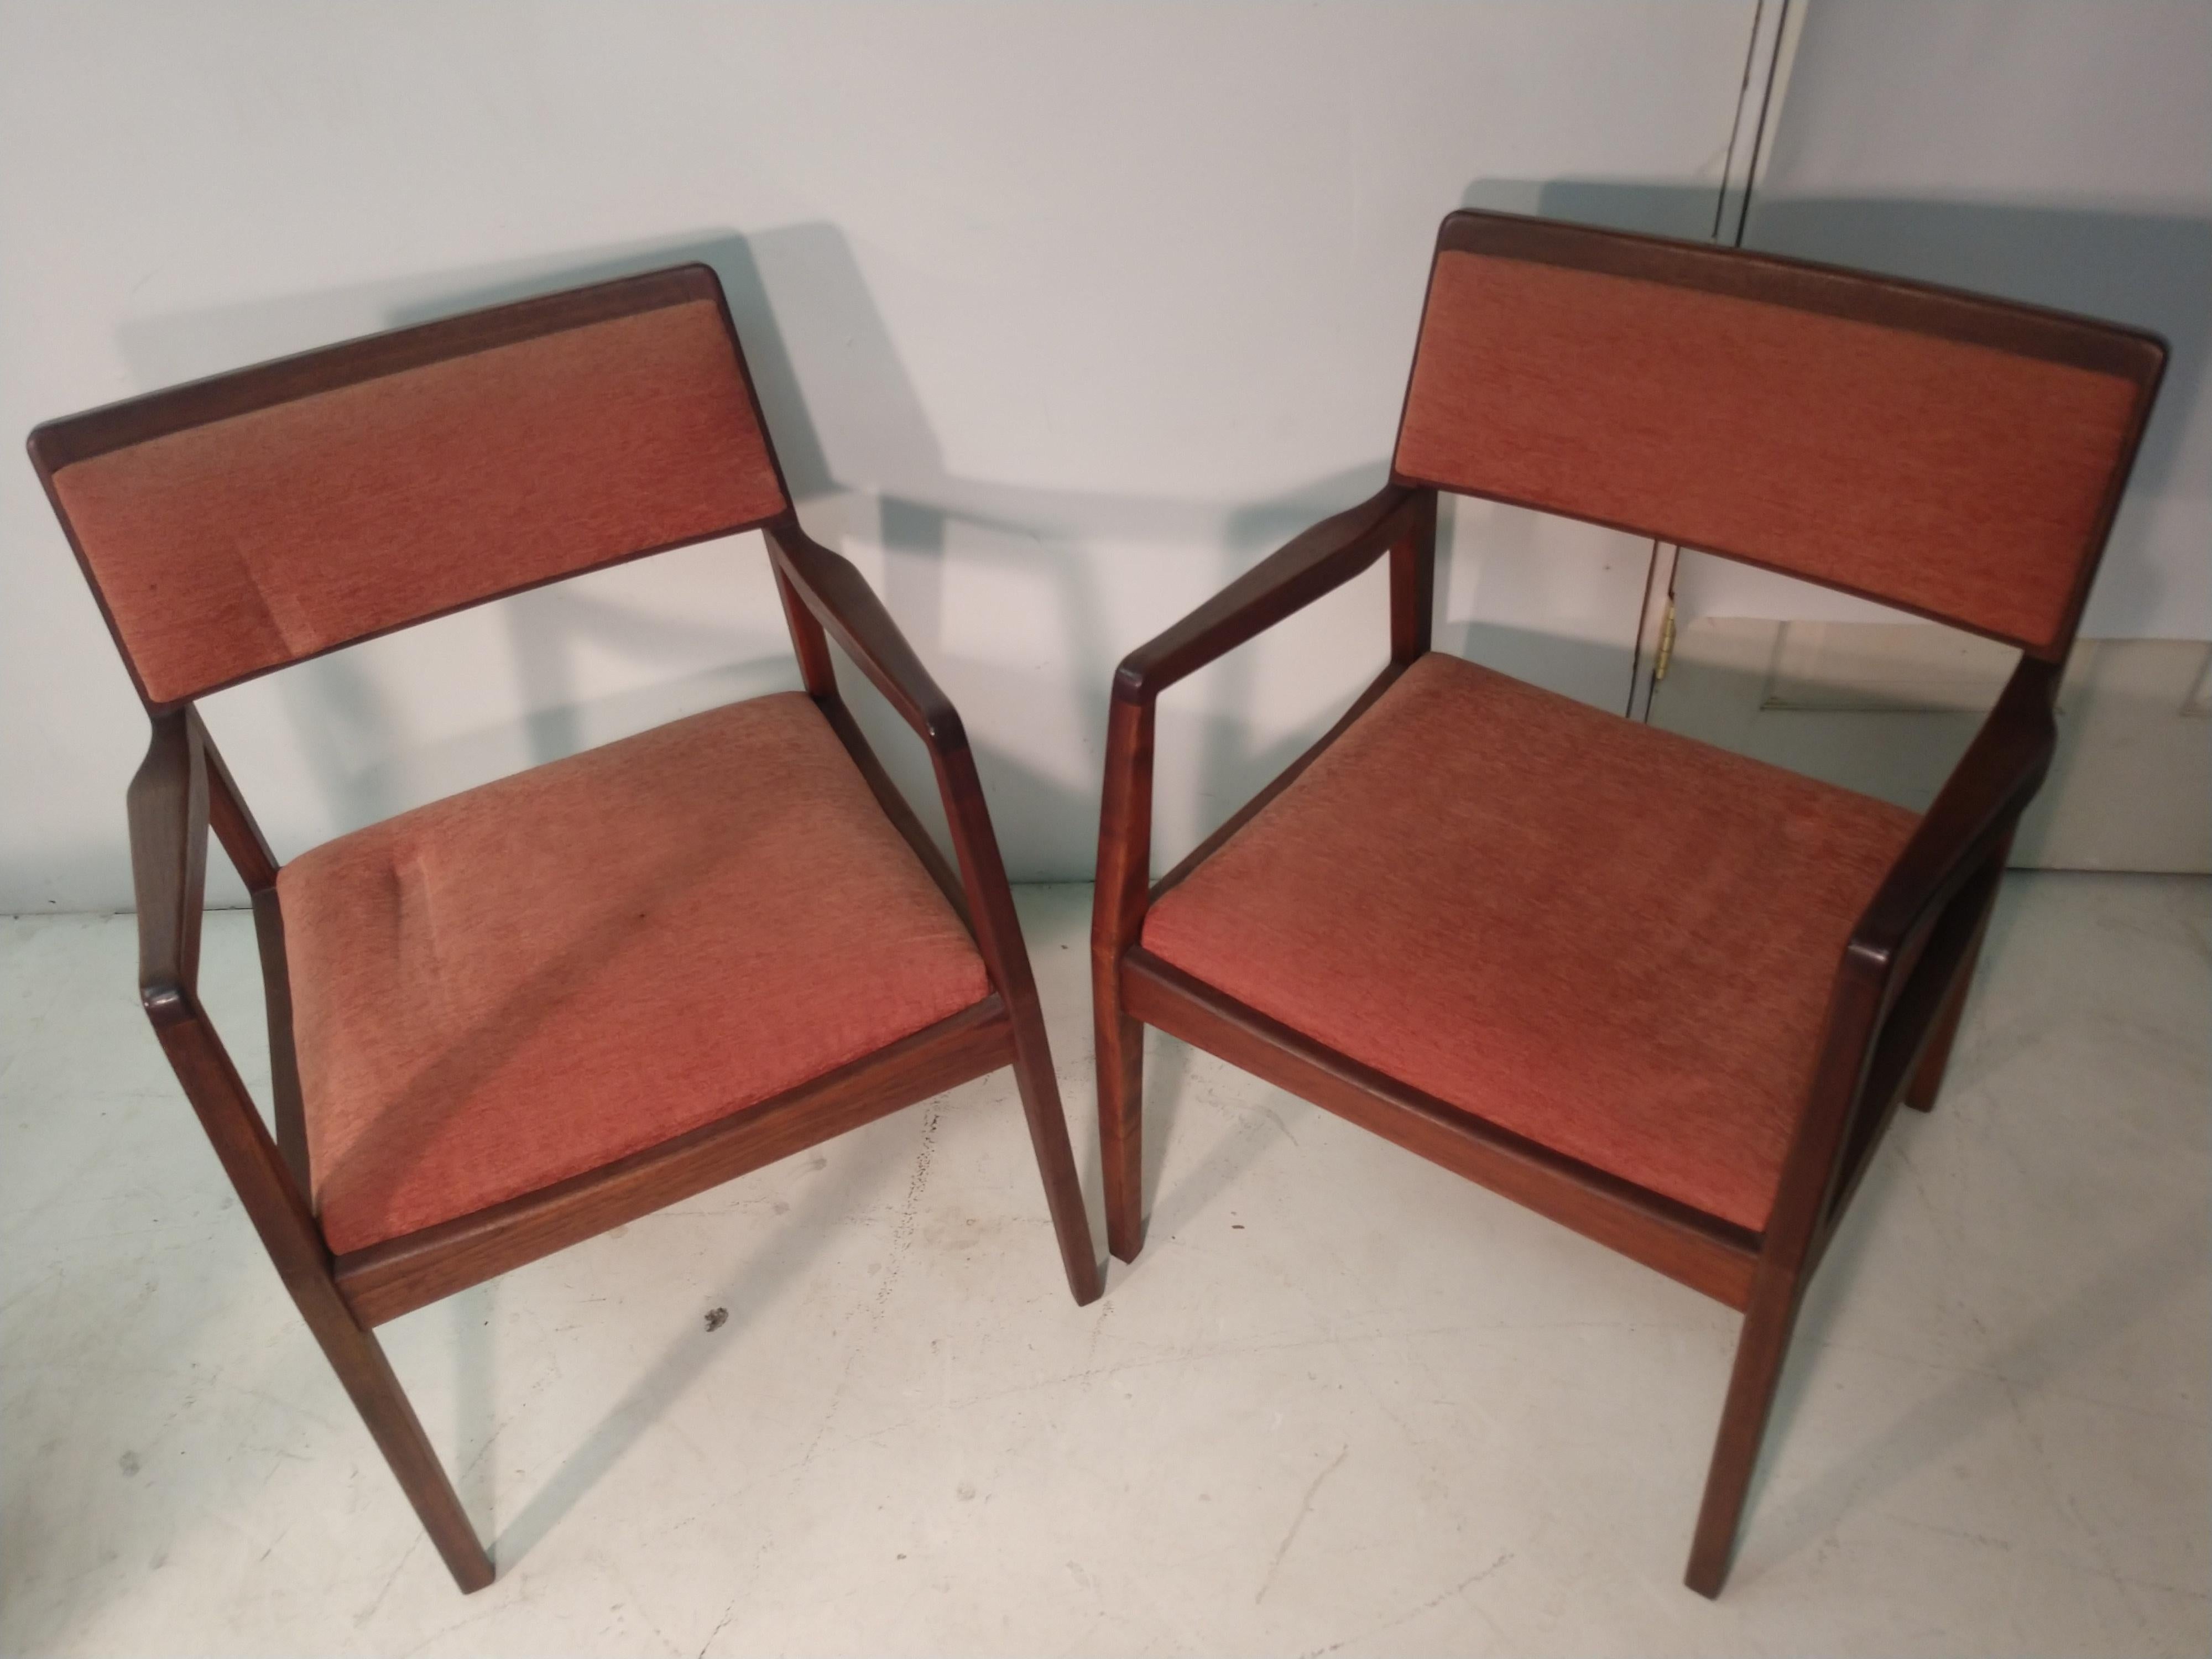 Oiled Set of Six Mid-Century Modern Dining Chairs by Jen's Risom